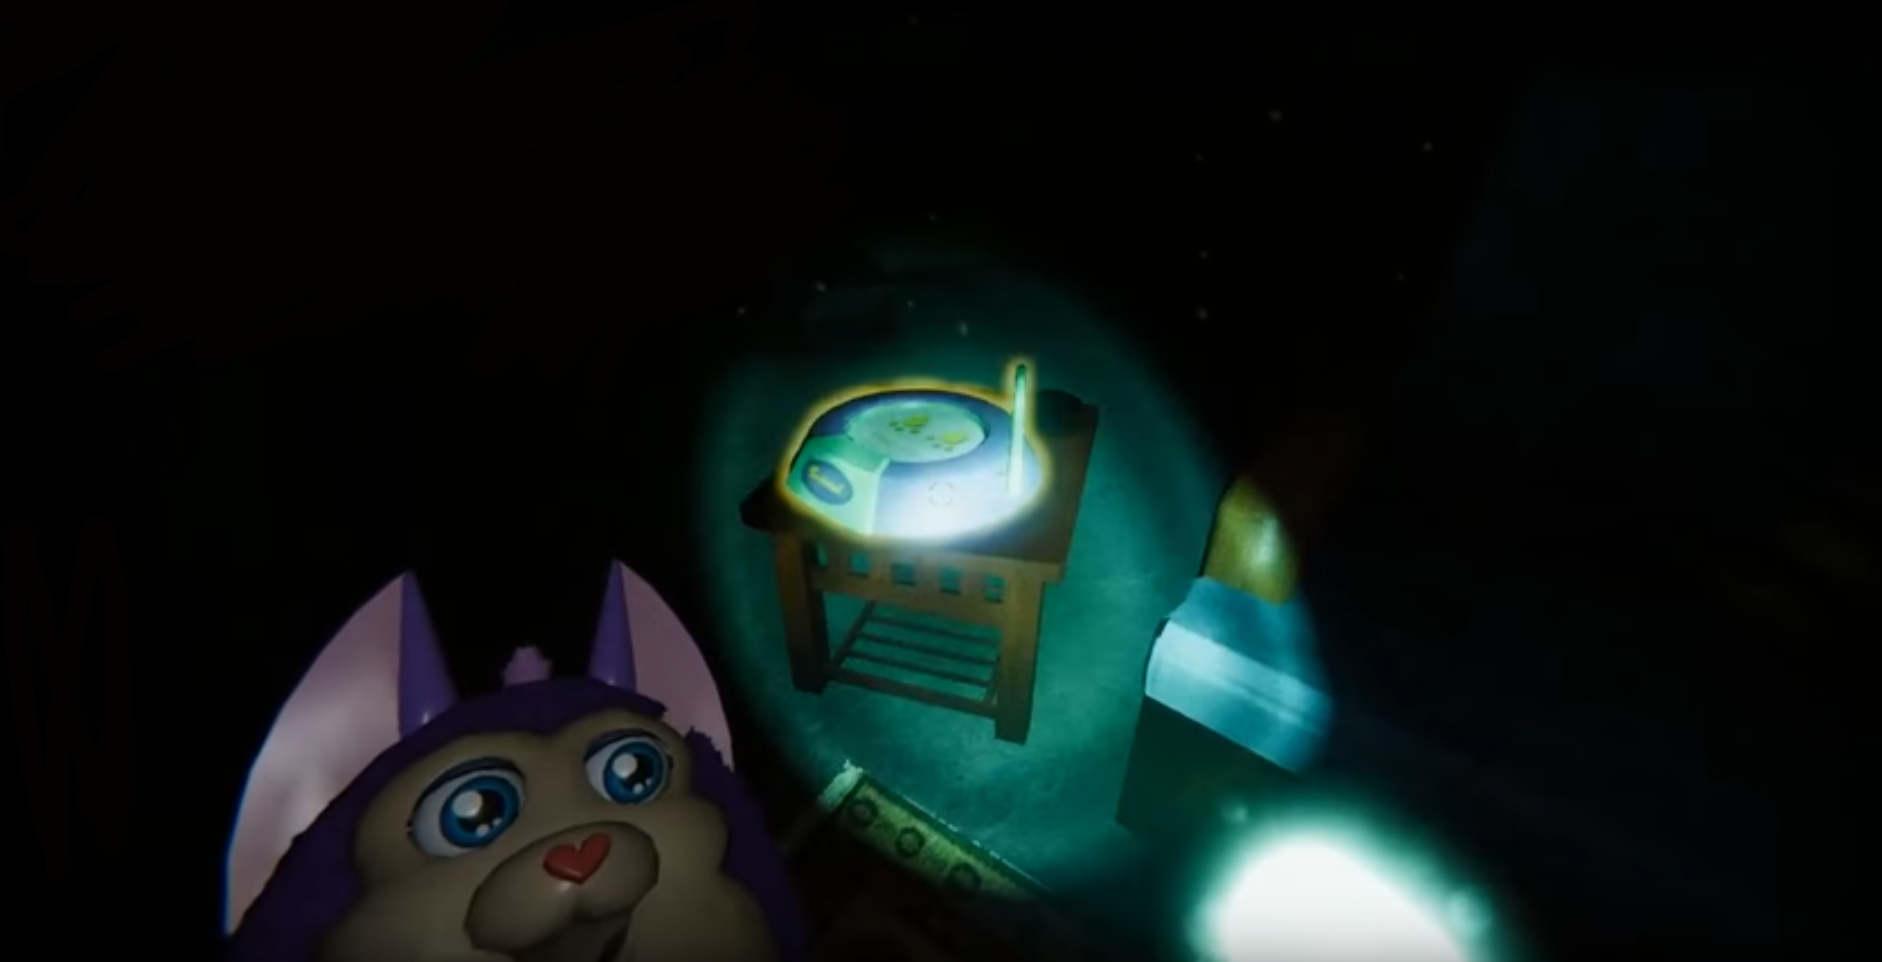 Tattletail on a charger. : r/Tattletail